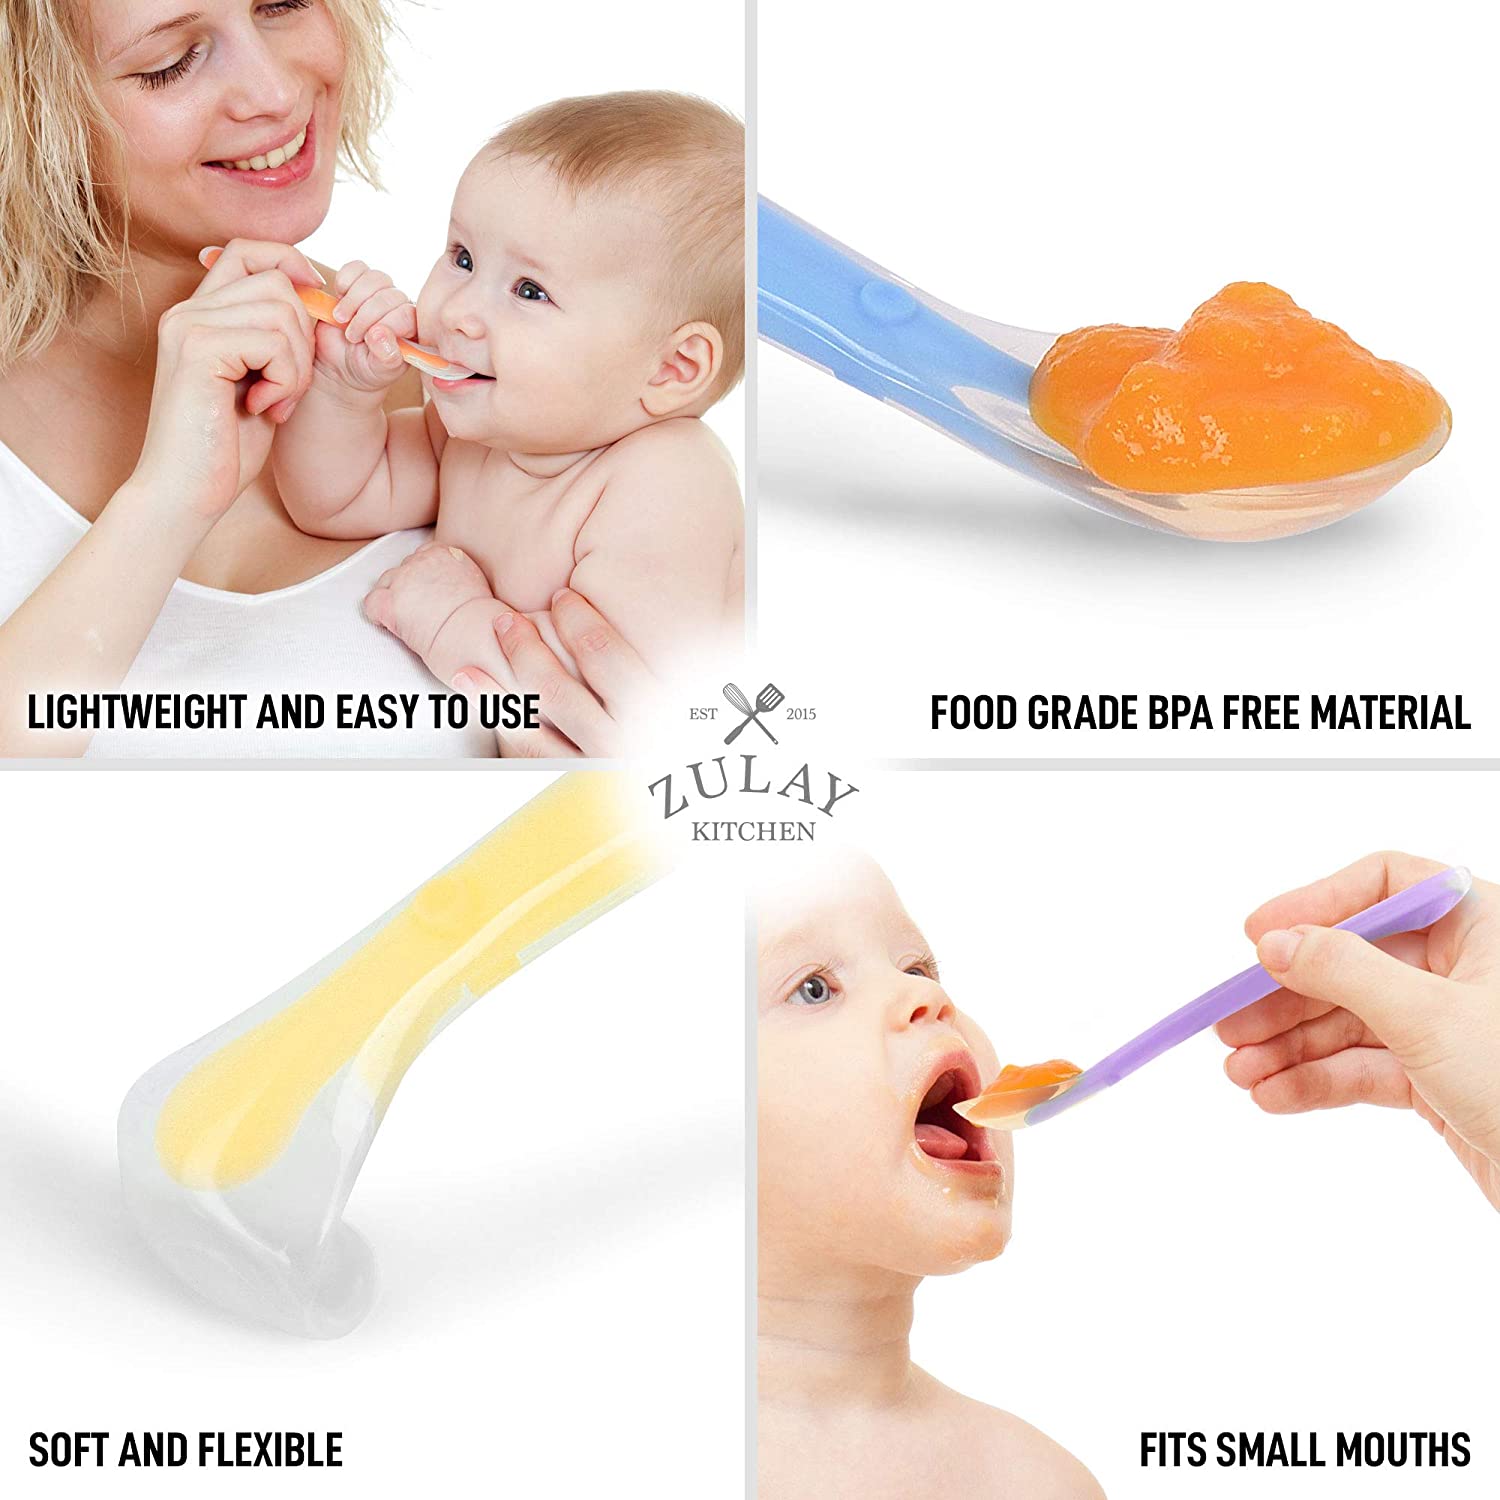  NAZIRABABY Silicone Baby Bowls and Spoons First Stage